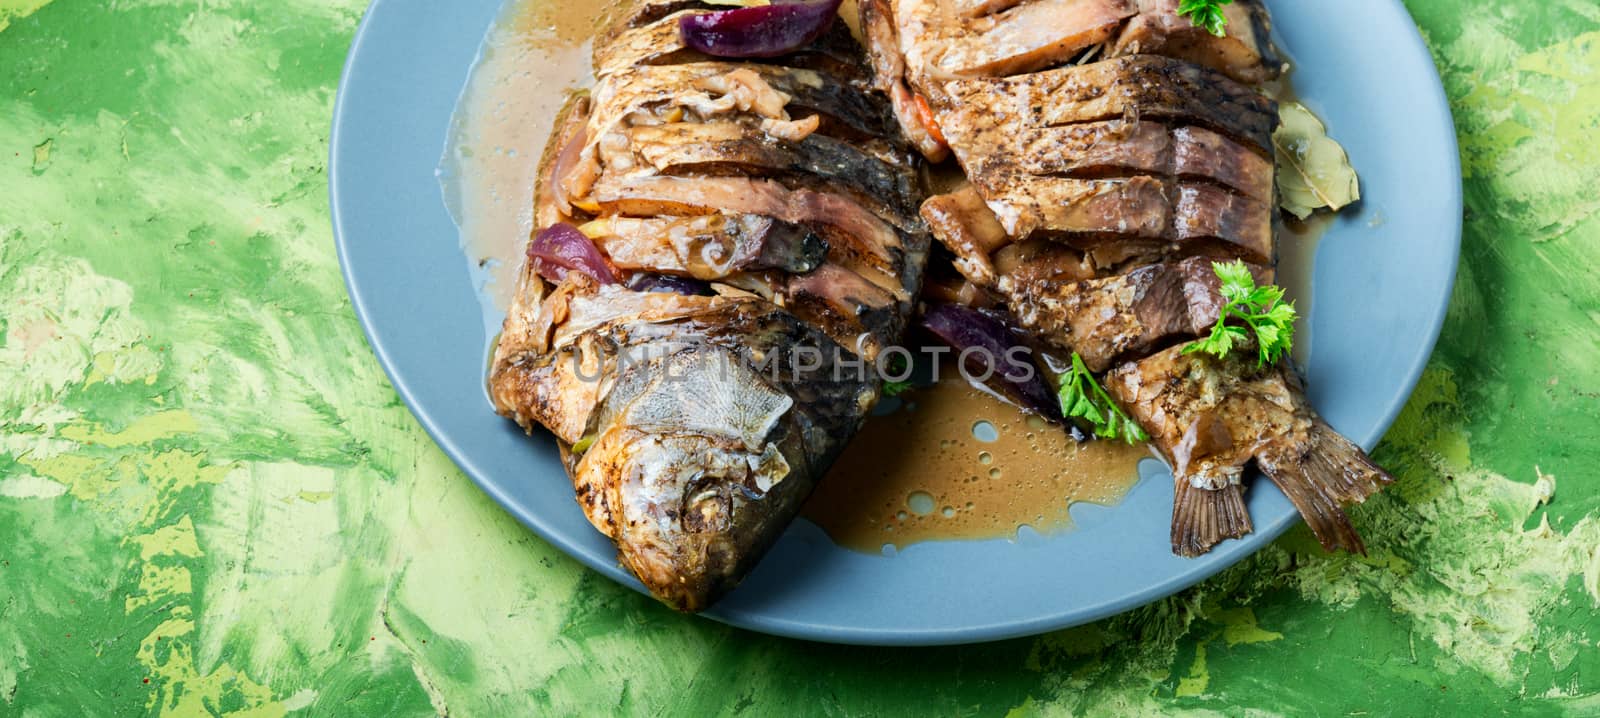 Grilled fish with lime by LMykola